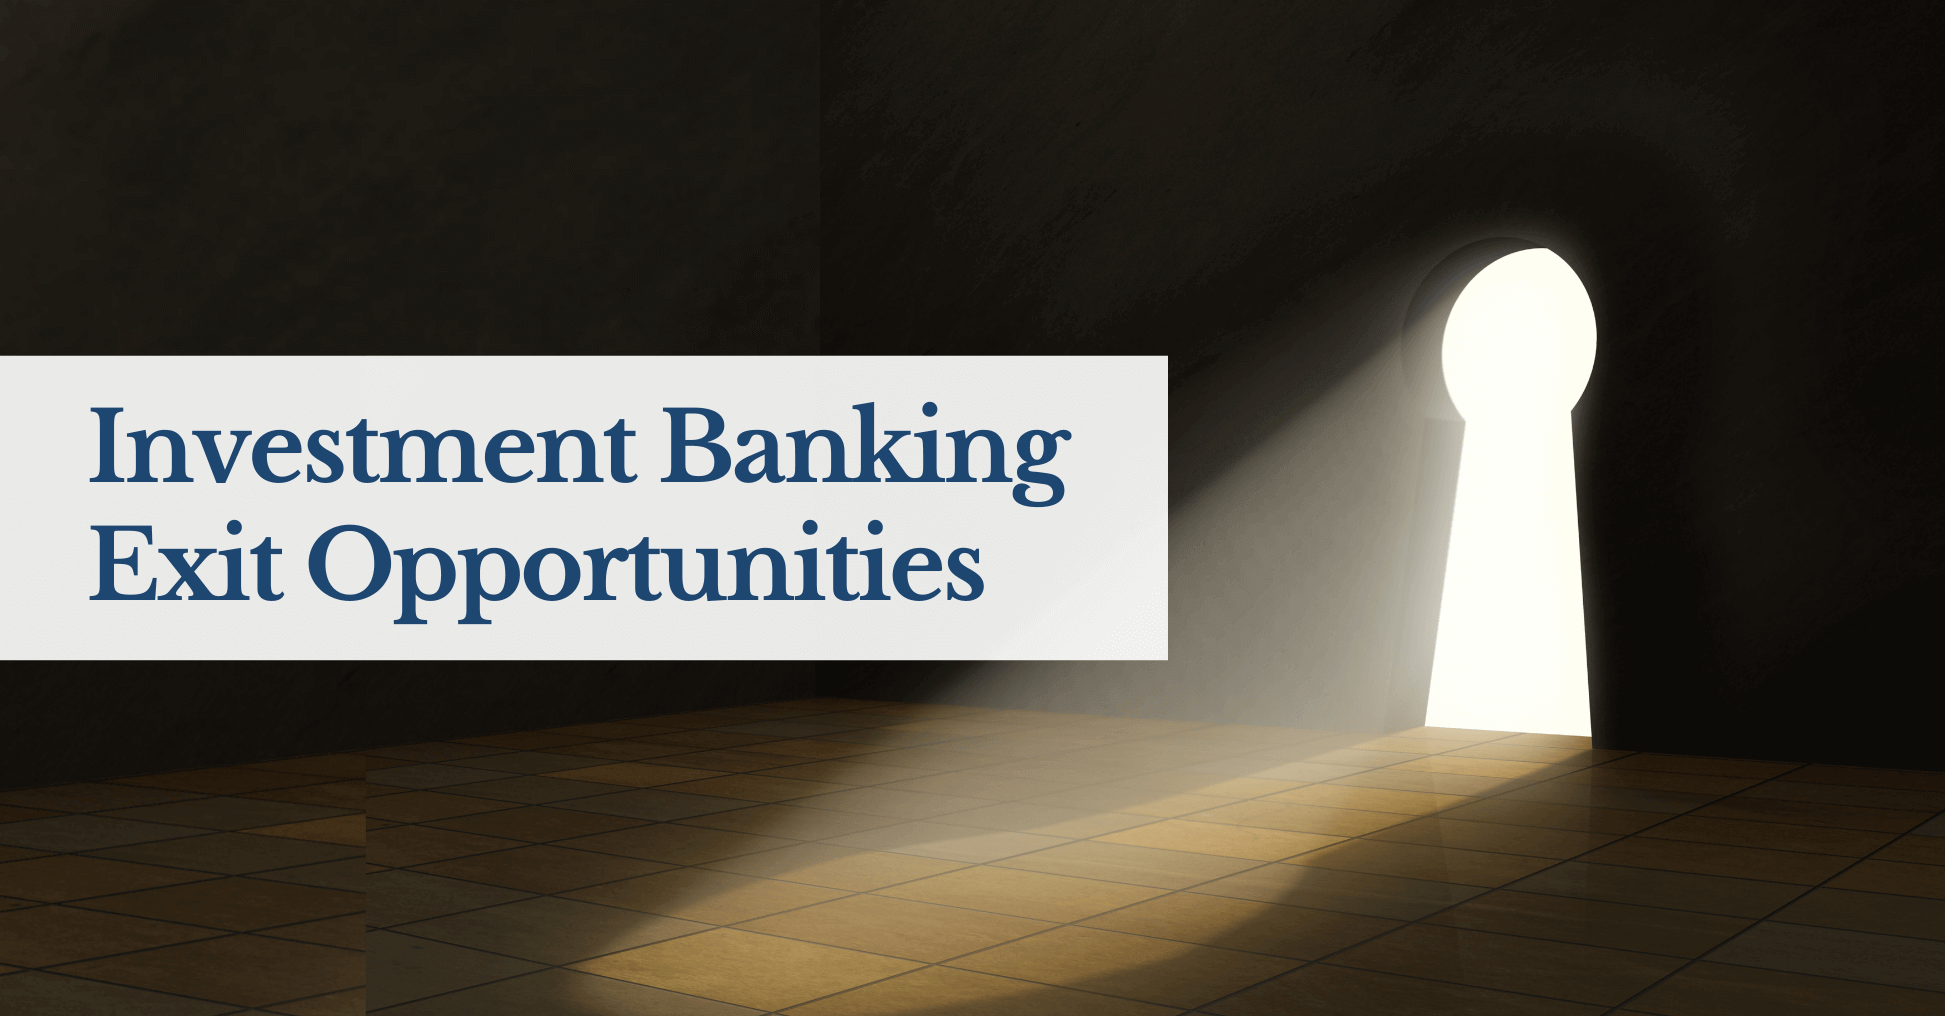 Investment Banking Exit Opportunities